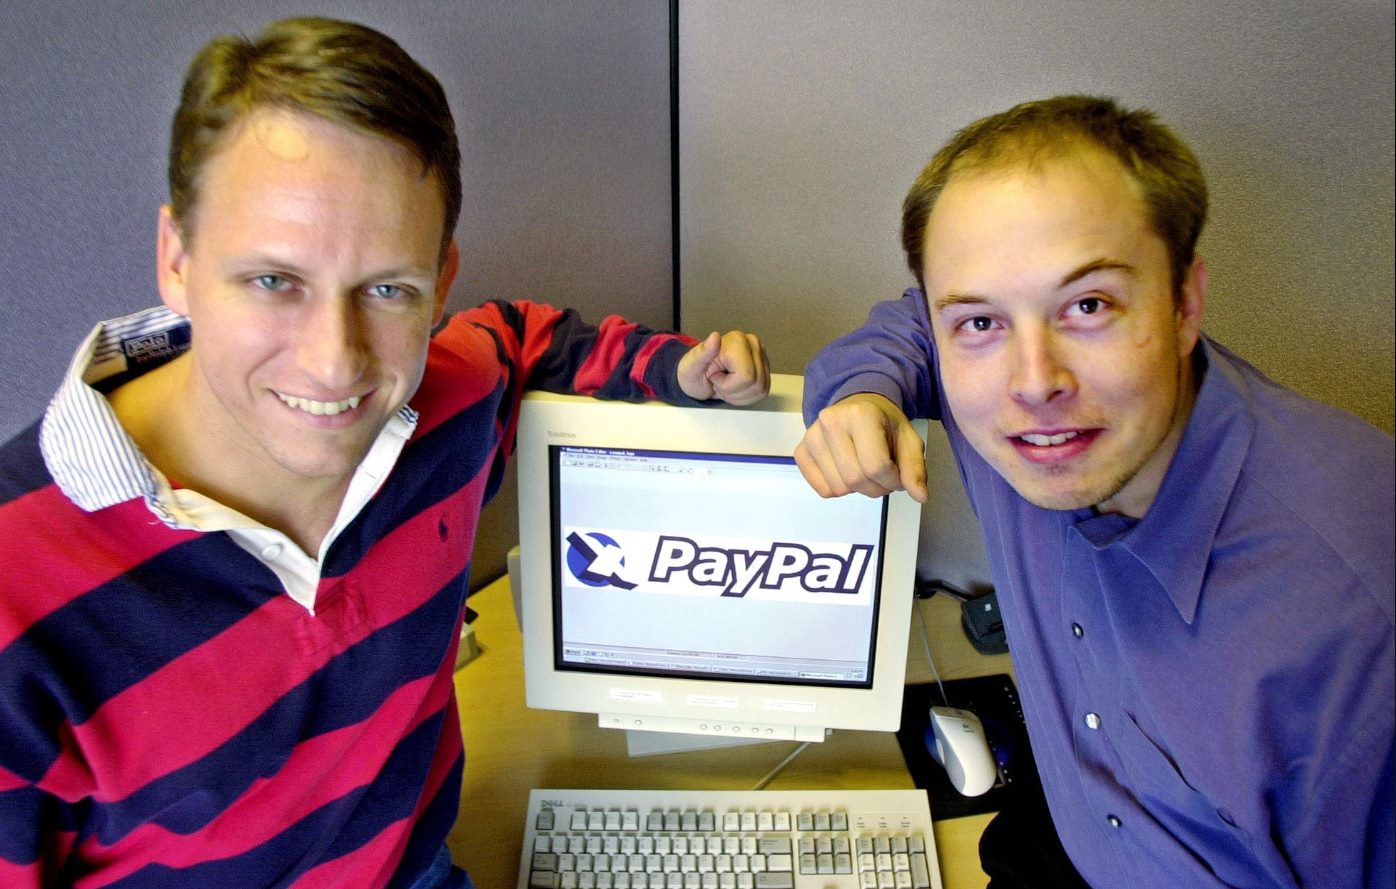 Who Created PayPal- Elon Musk